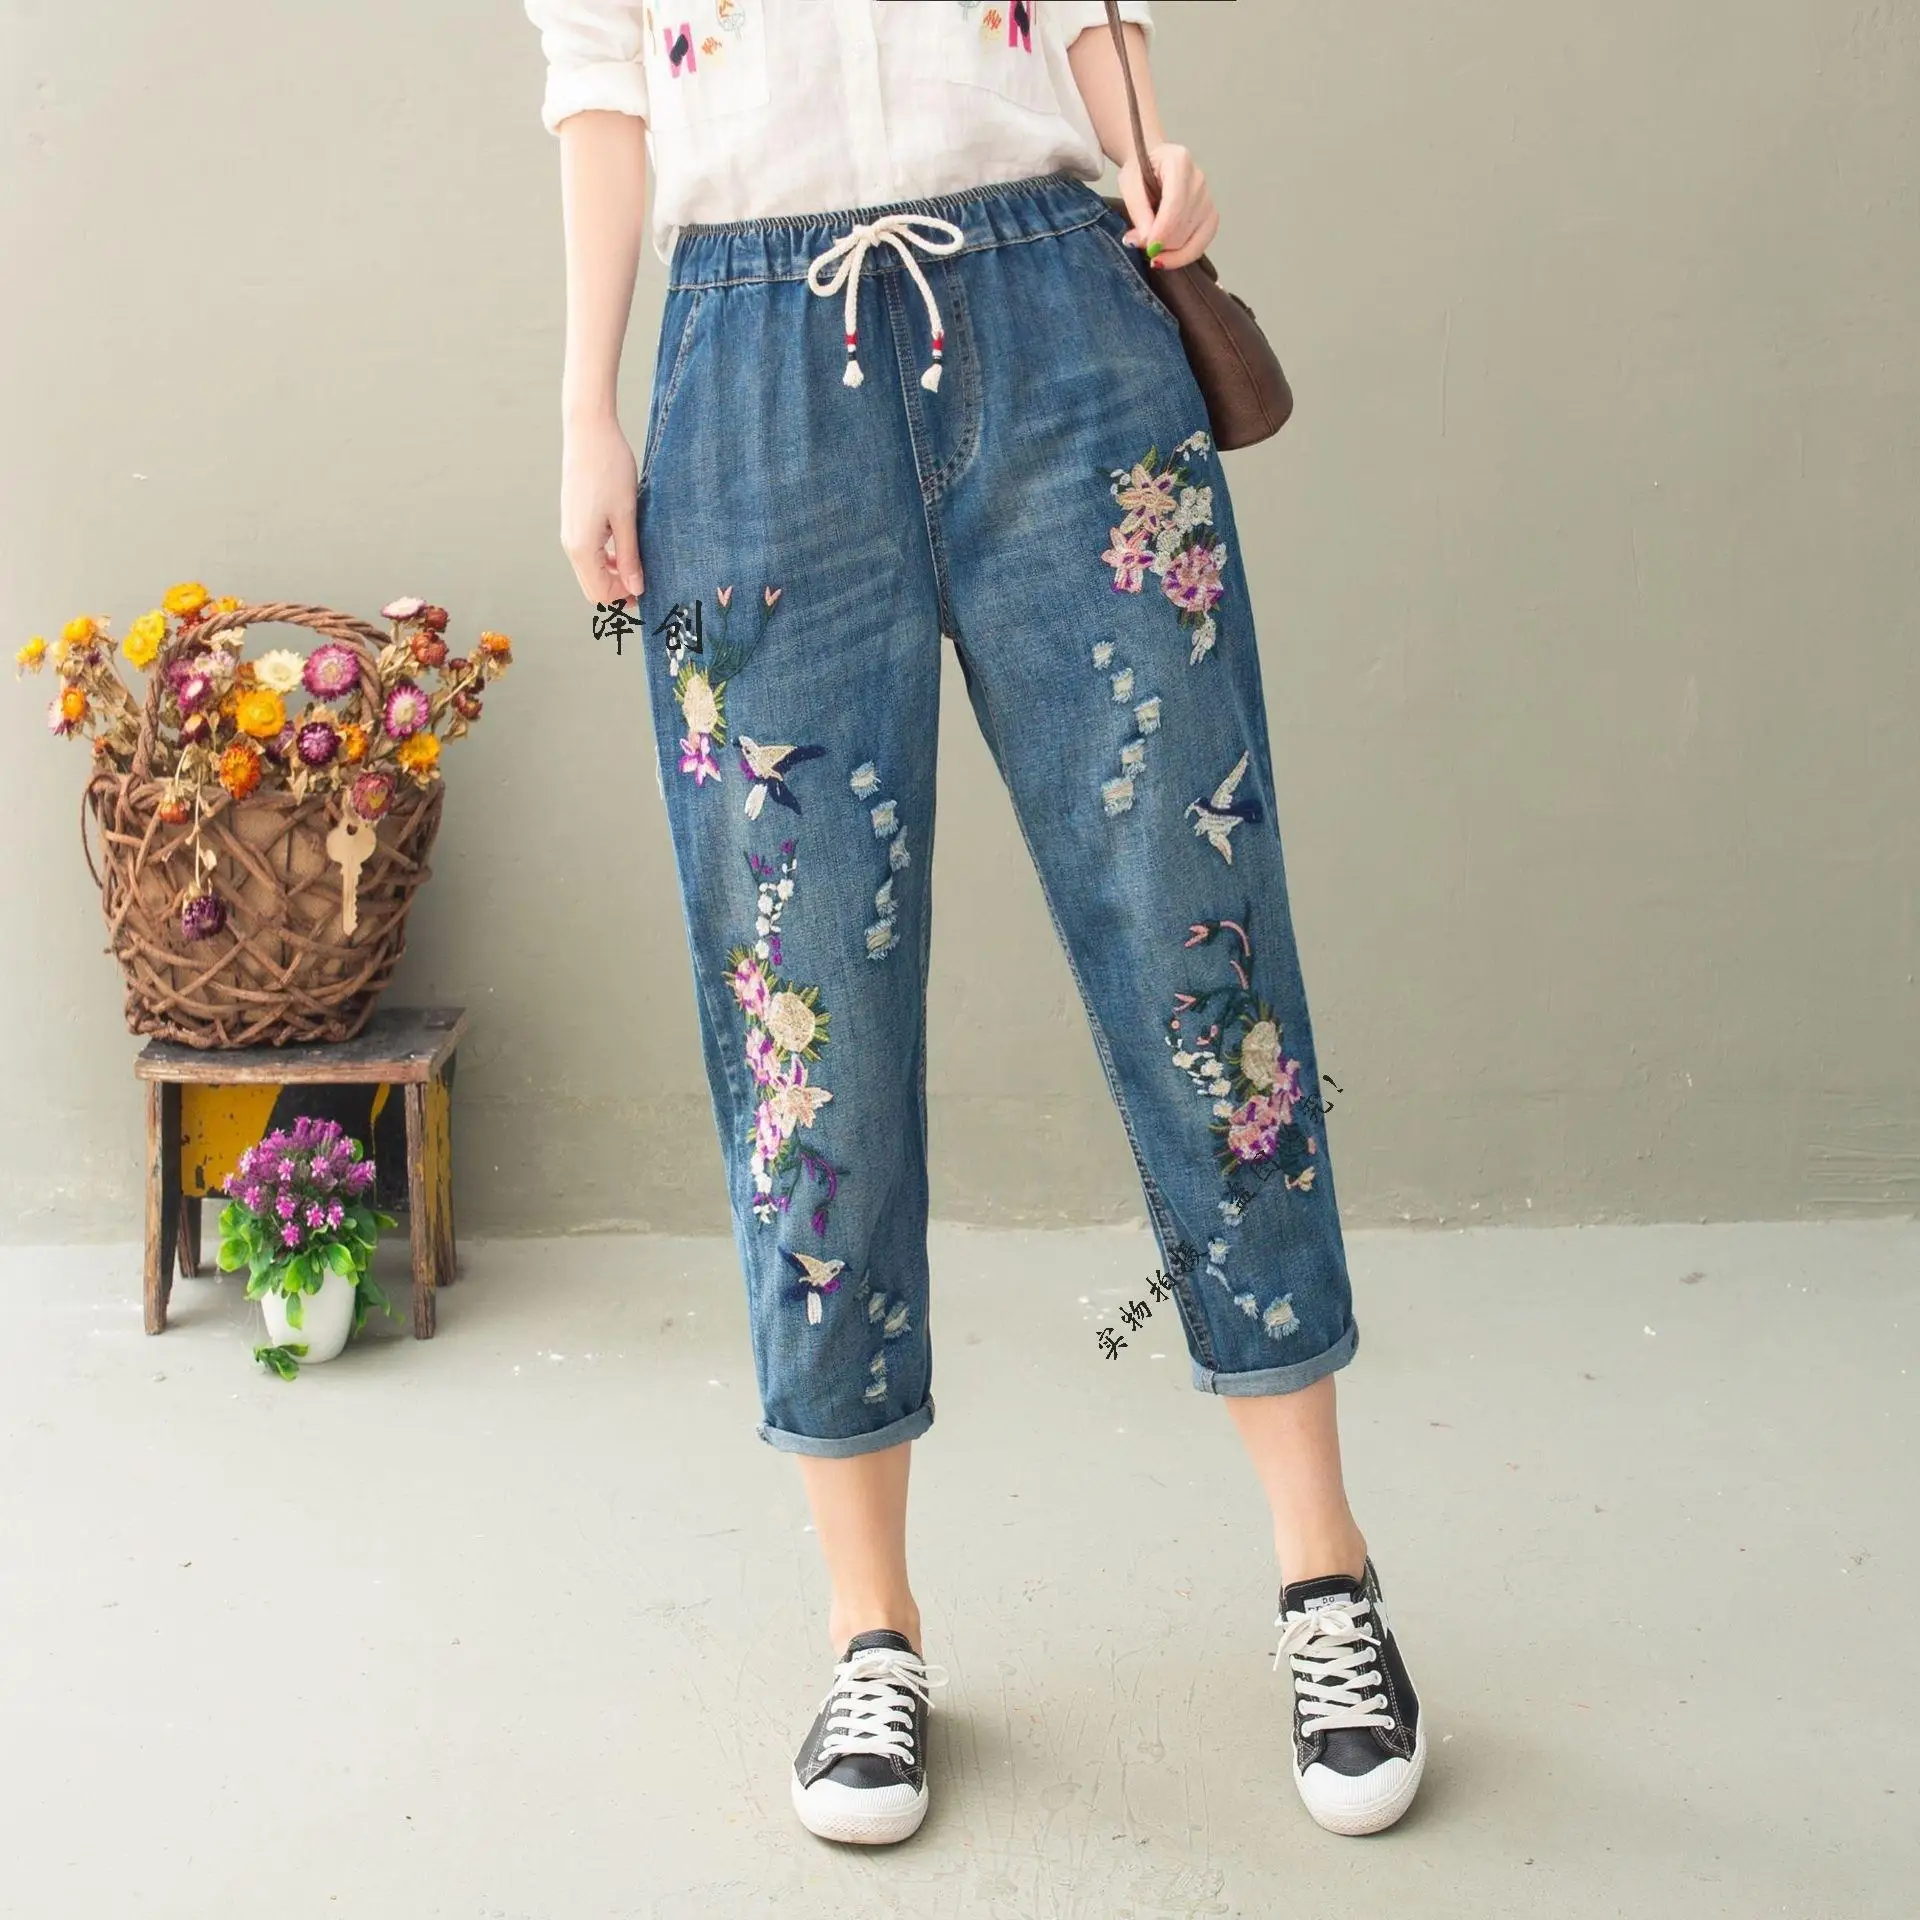 Women Harem Jeans Elastic Waist Spring Floral Embroidery Chinese Style Denim Pant Calf Length Trousers Lady Casual Loose Pants